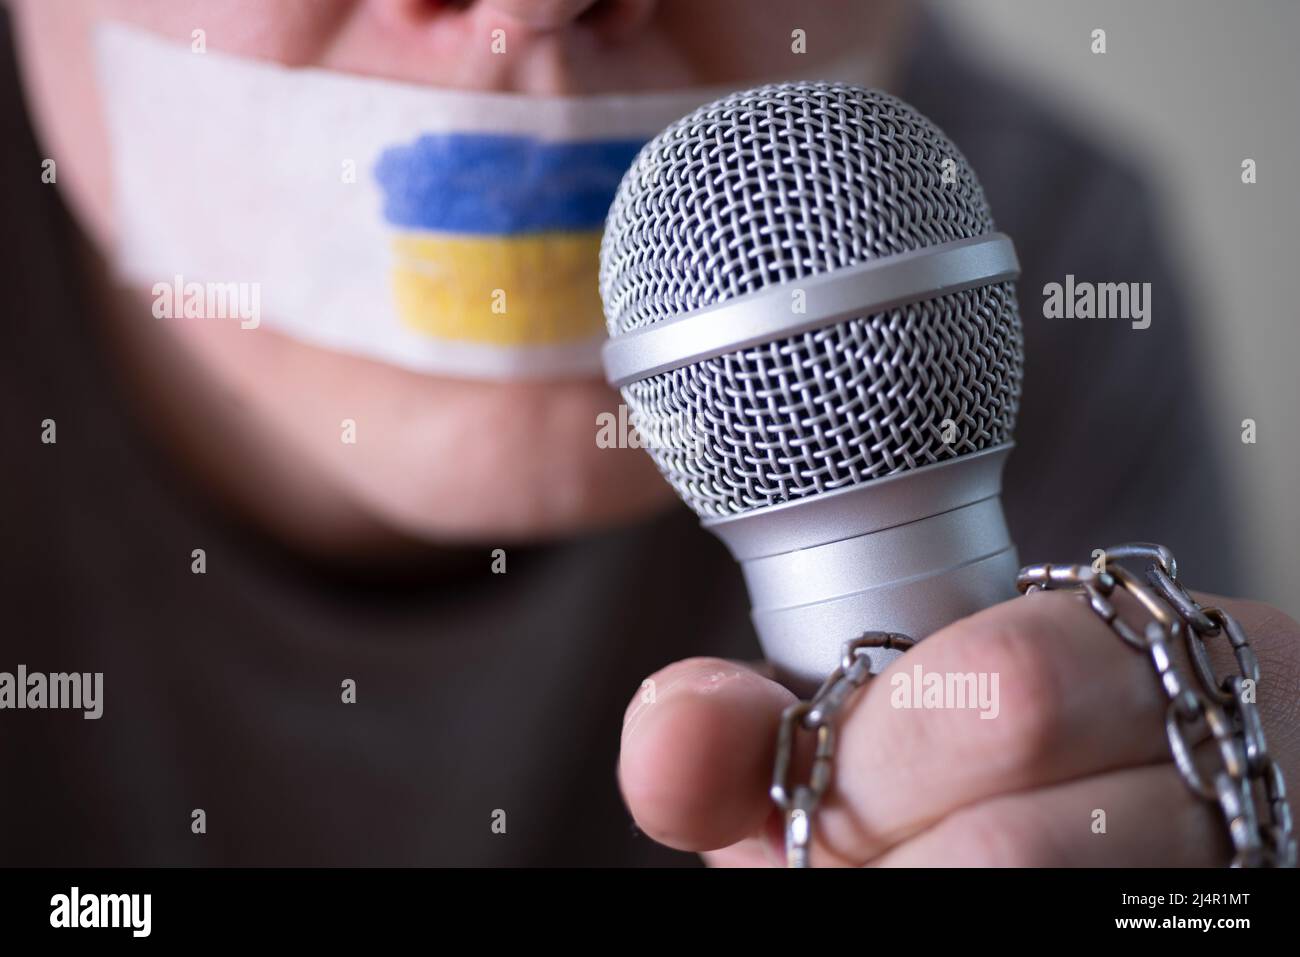 Tape over his mouth with the flag of Ukraine, trying to speak into a microphone. The concept of freedom of the press in Ukraine. Stock Photo